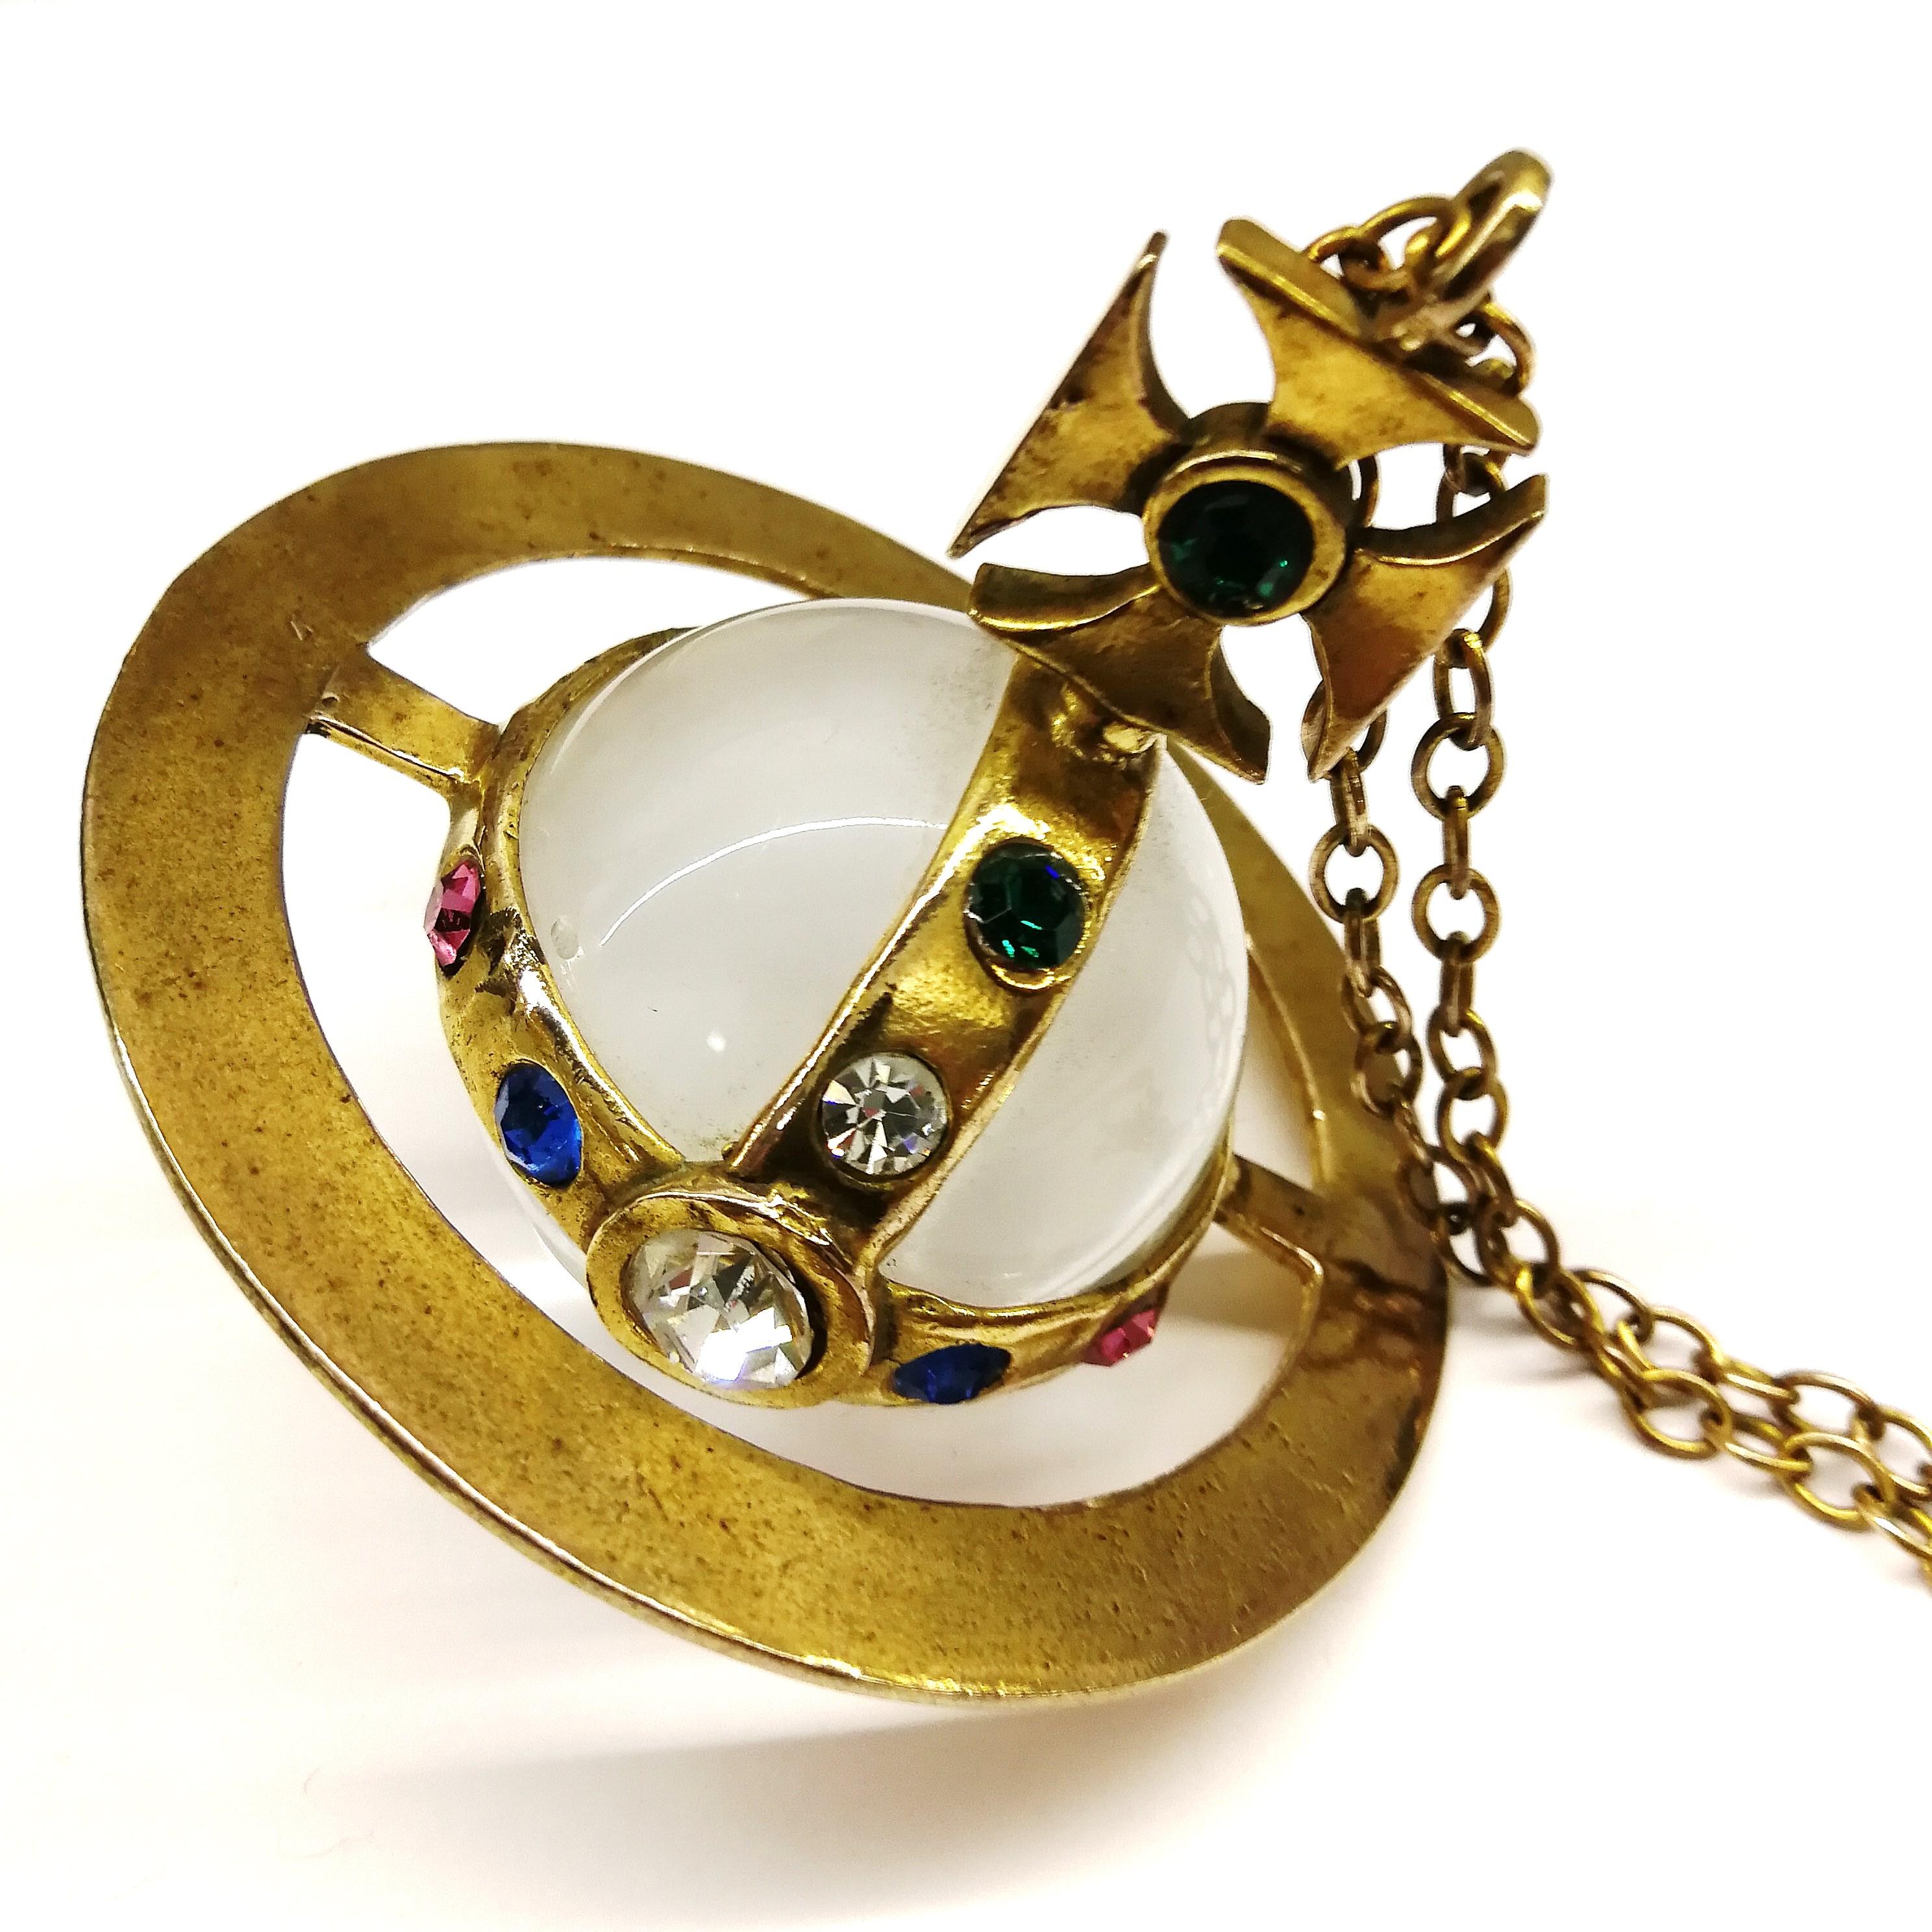 The 'symbol' of Vivienne Westwood, this is the iconic 'orb' that has adorns her clothing and accessories. In this incarnation, the large model of this pendant from the late 1980s, symbolising the whole ethos of this very British designer. Made from